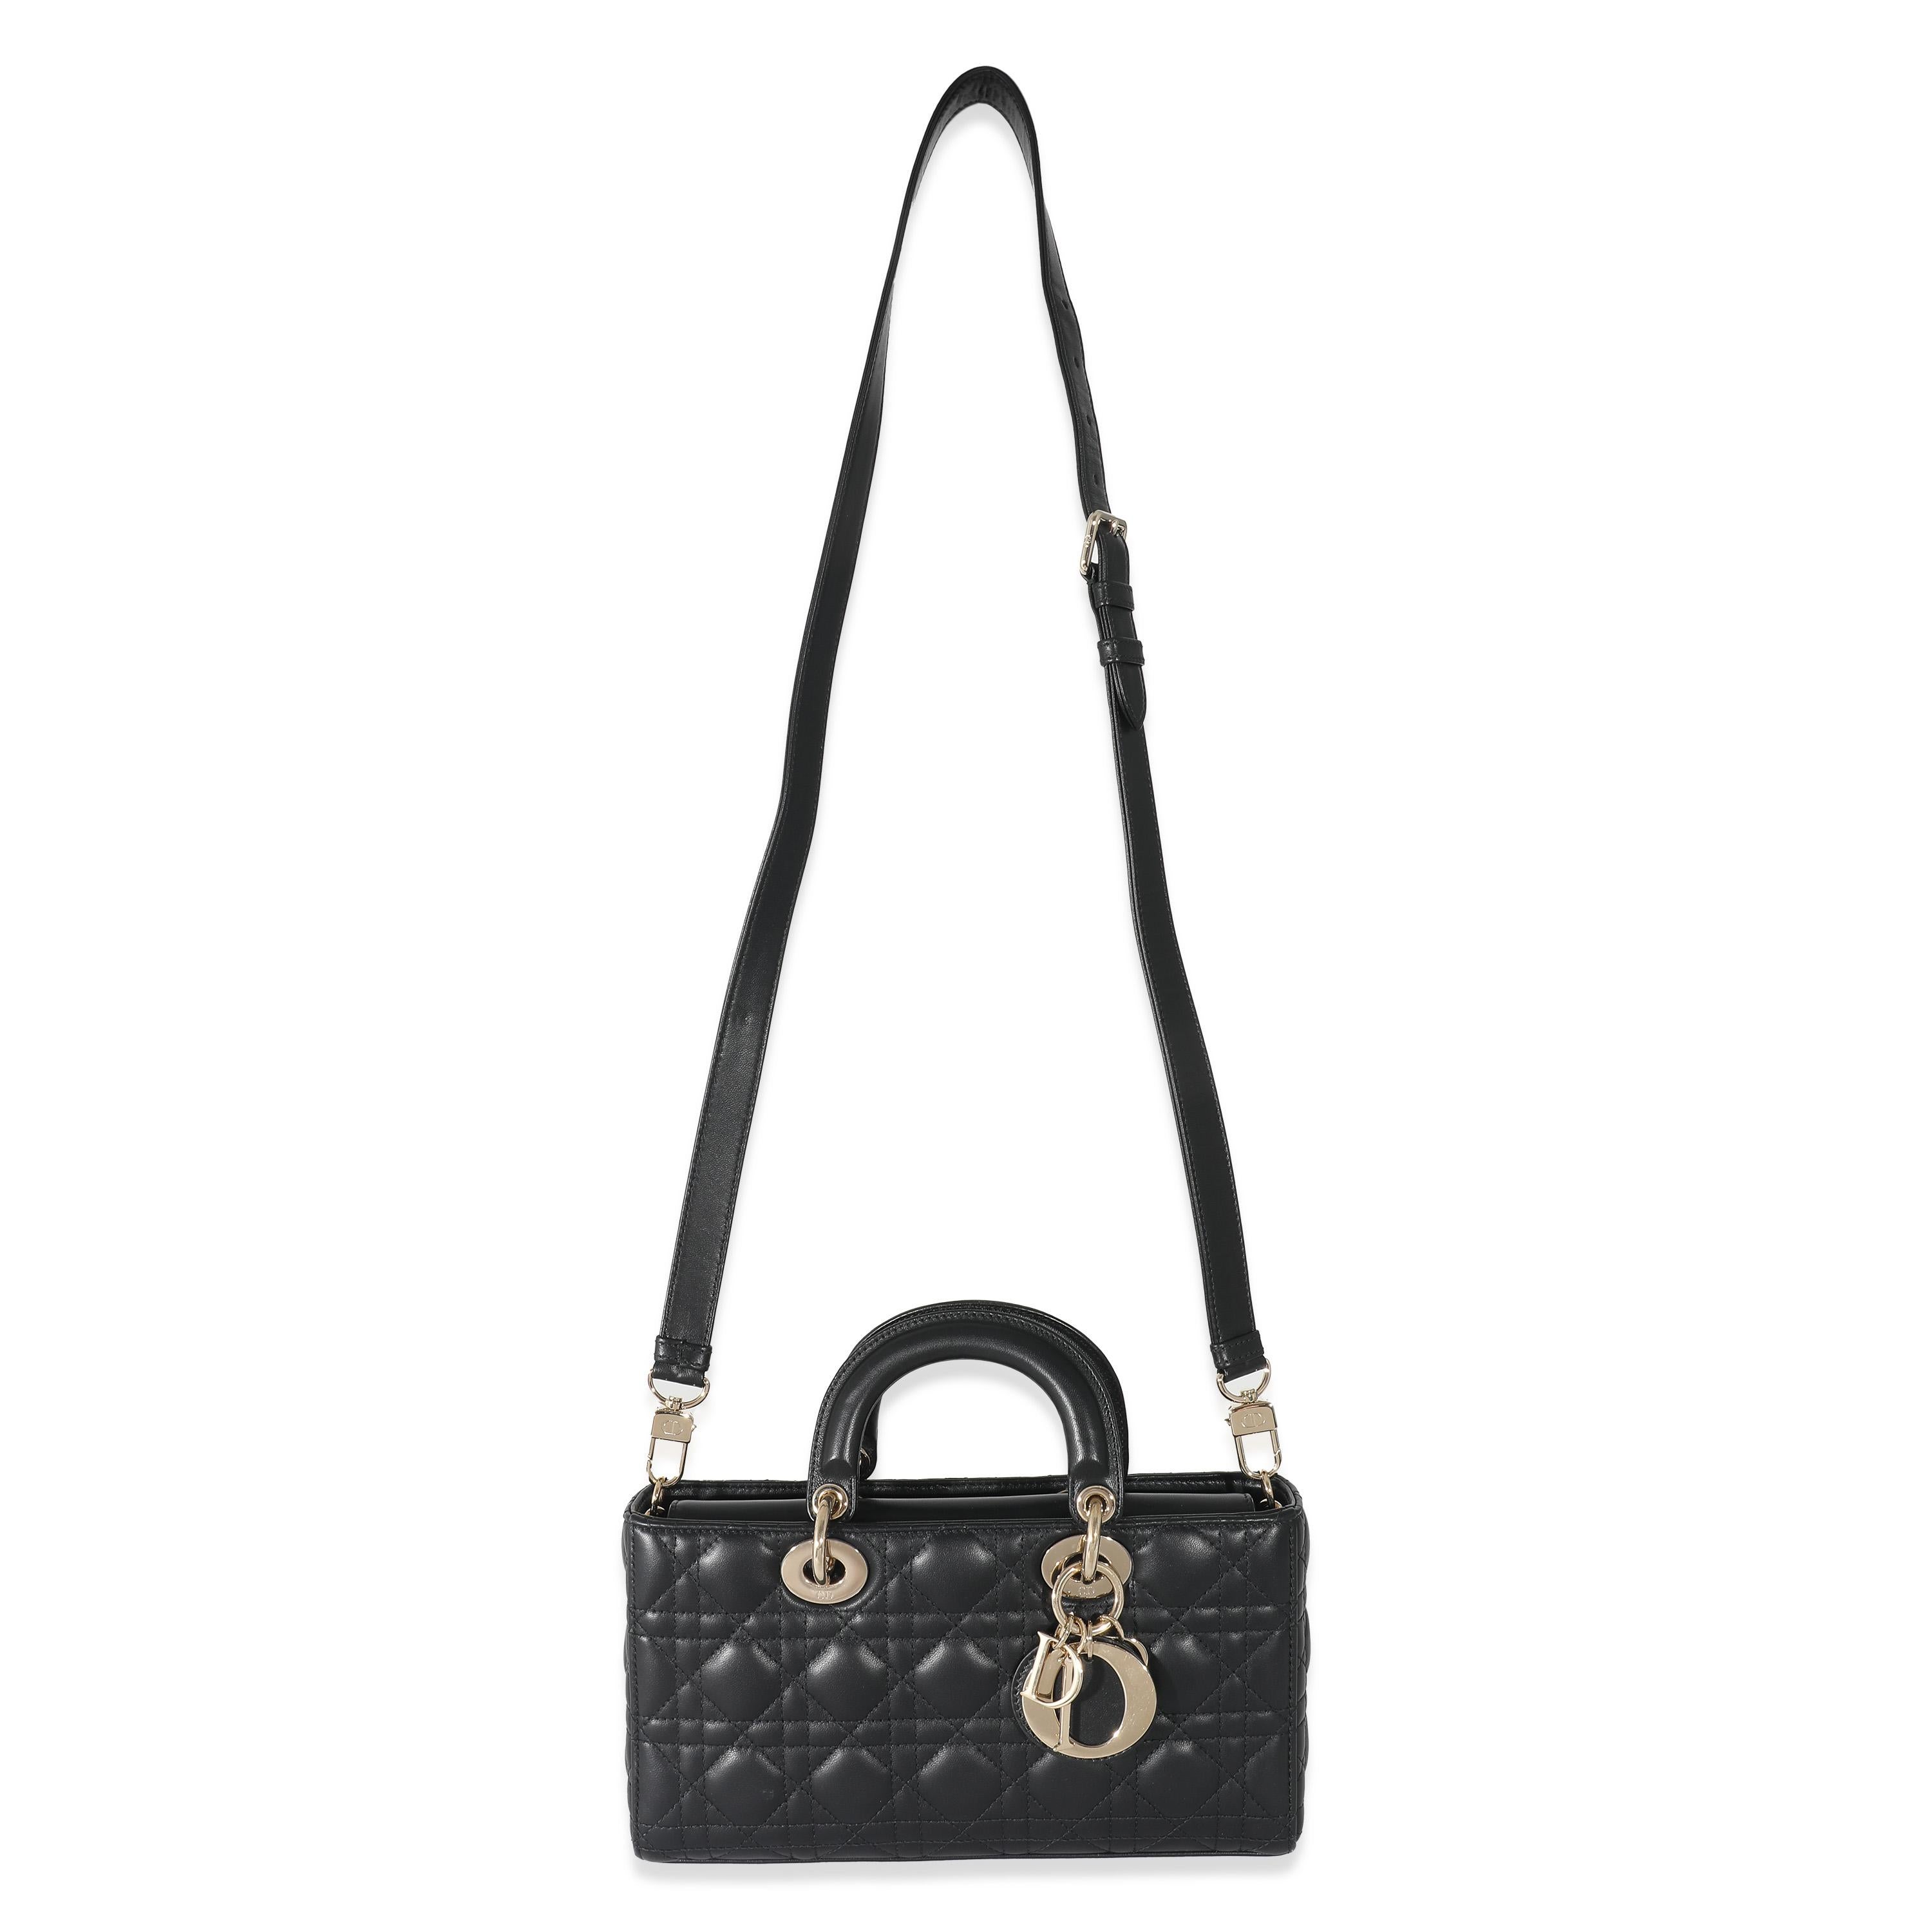 Listing Title: Christian Dior Black Cannage Lambskin Medium D-Joy Bag
SKU: 133011
MSRP: 5100.00 USD
Condition: Pre-owned 
Handbag Condition: Very Good
Condition Comments: Item is in very good condition with minor signs of wear. Exterior corner